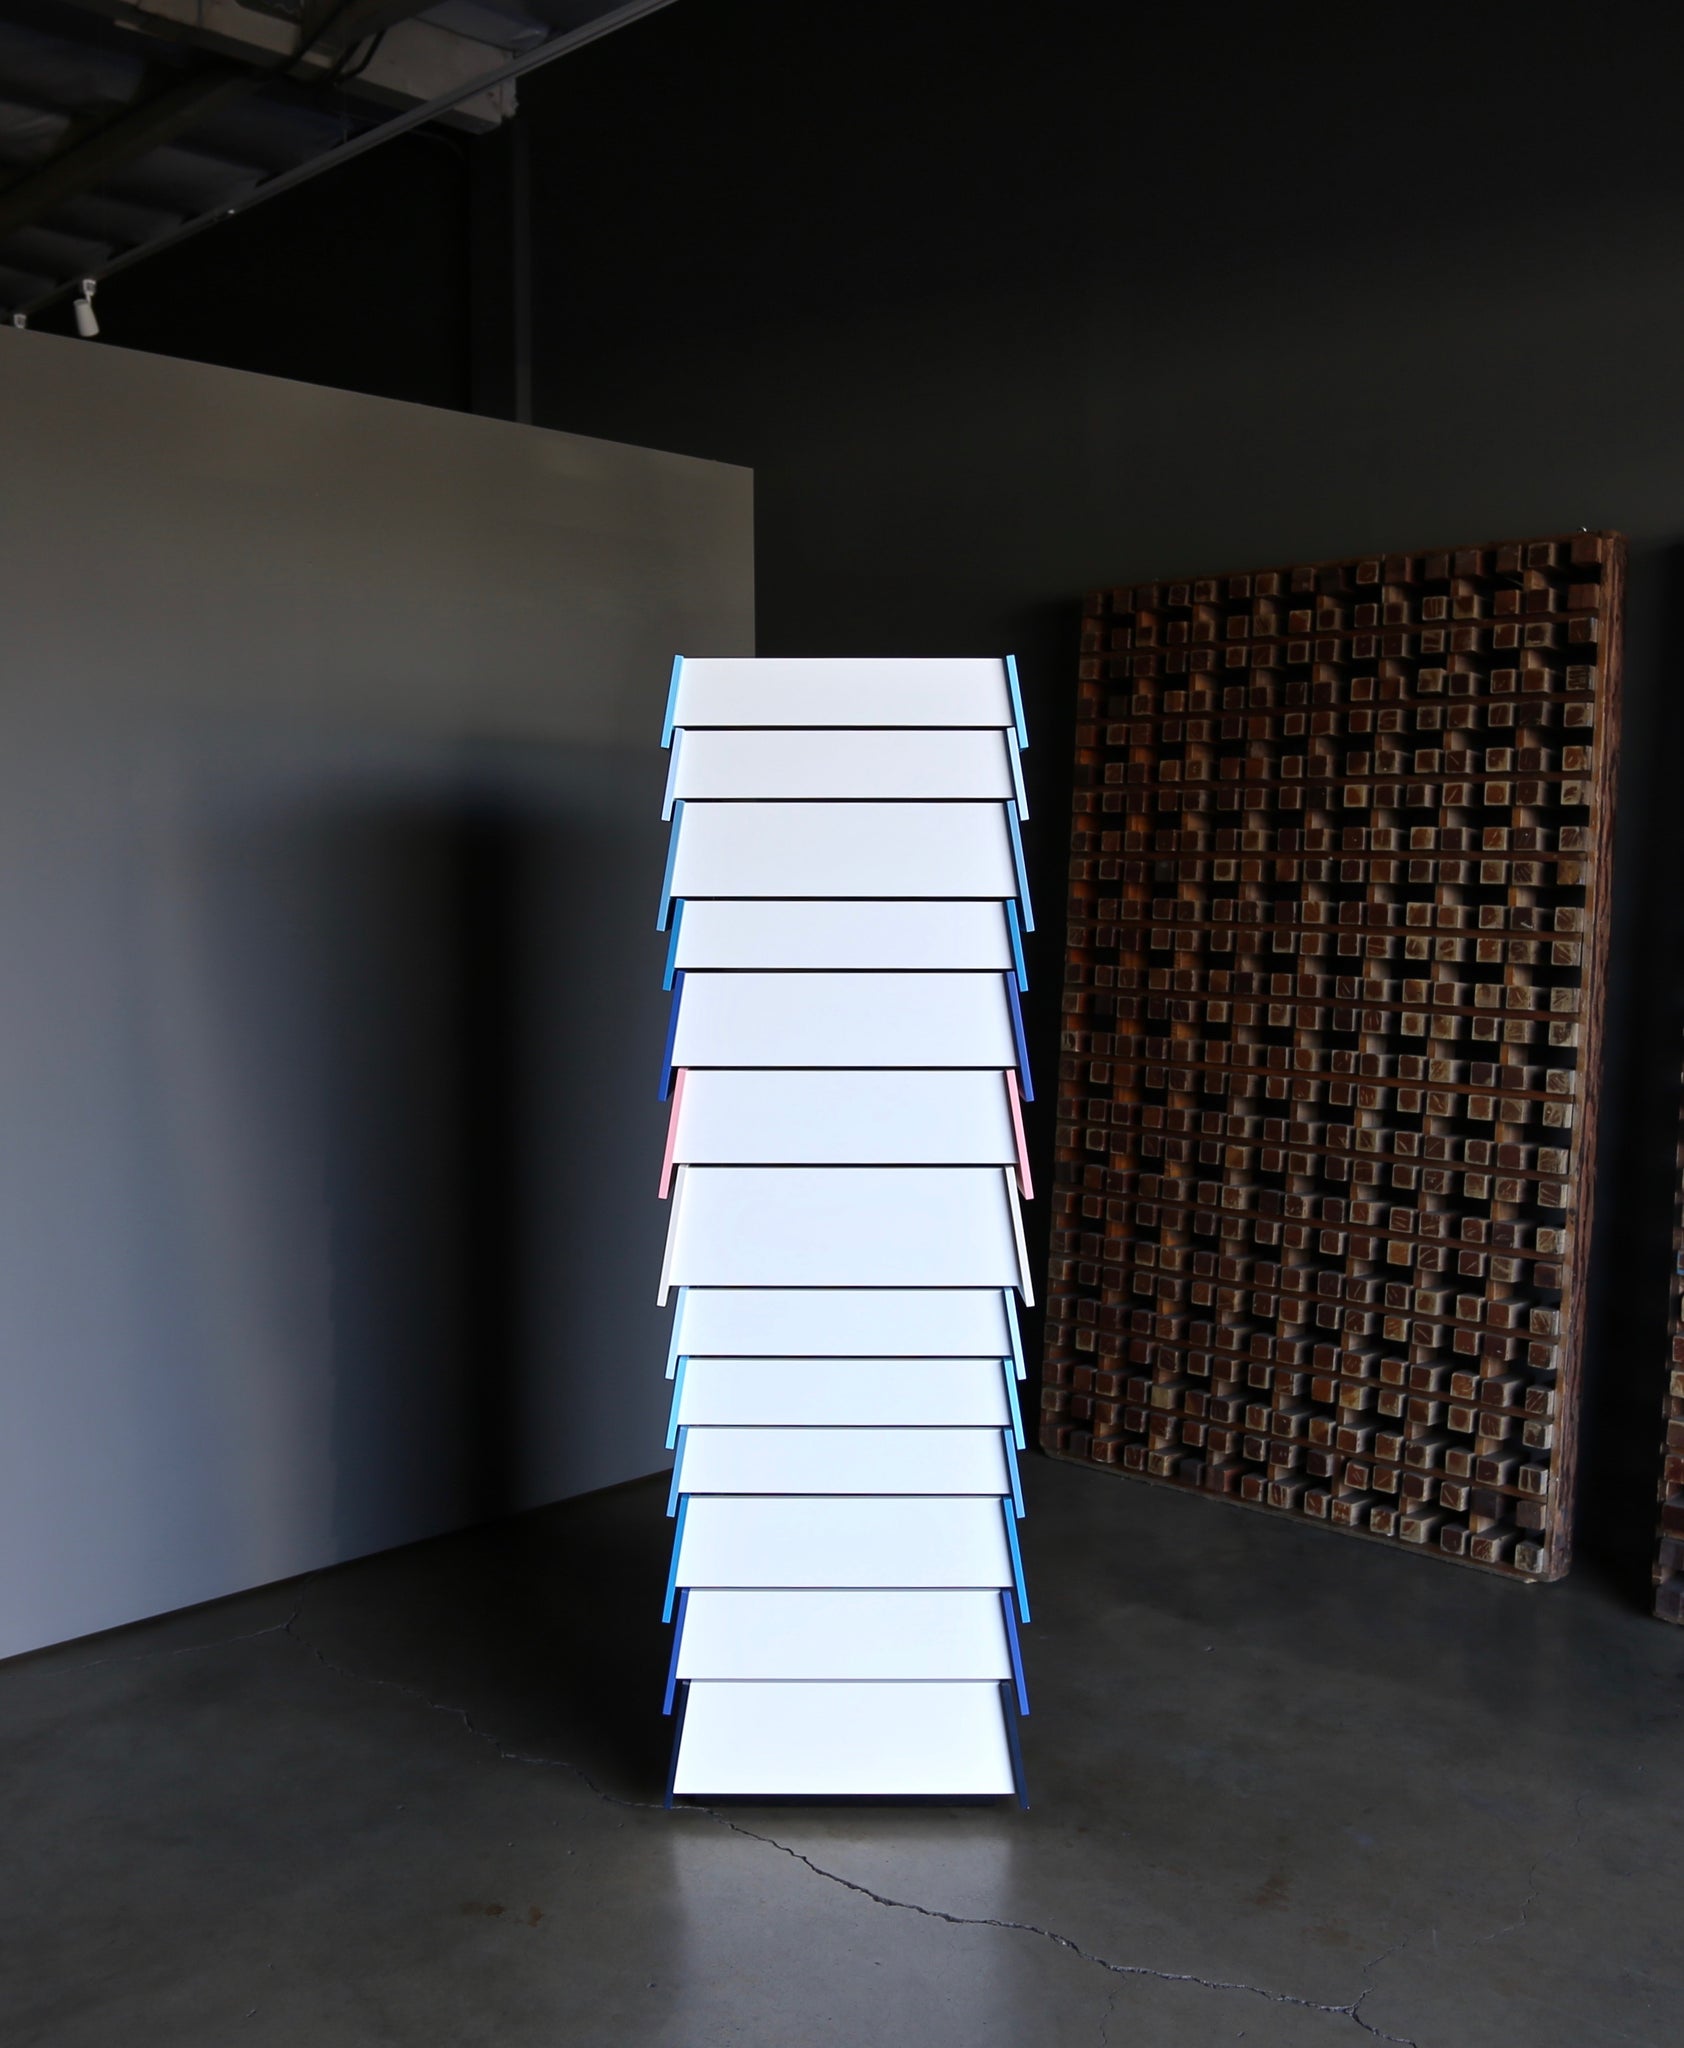 = SOLD = Established & Sons Stack-13 Drawers by Raw Edges and Shay Alkalay circa 2008